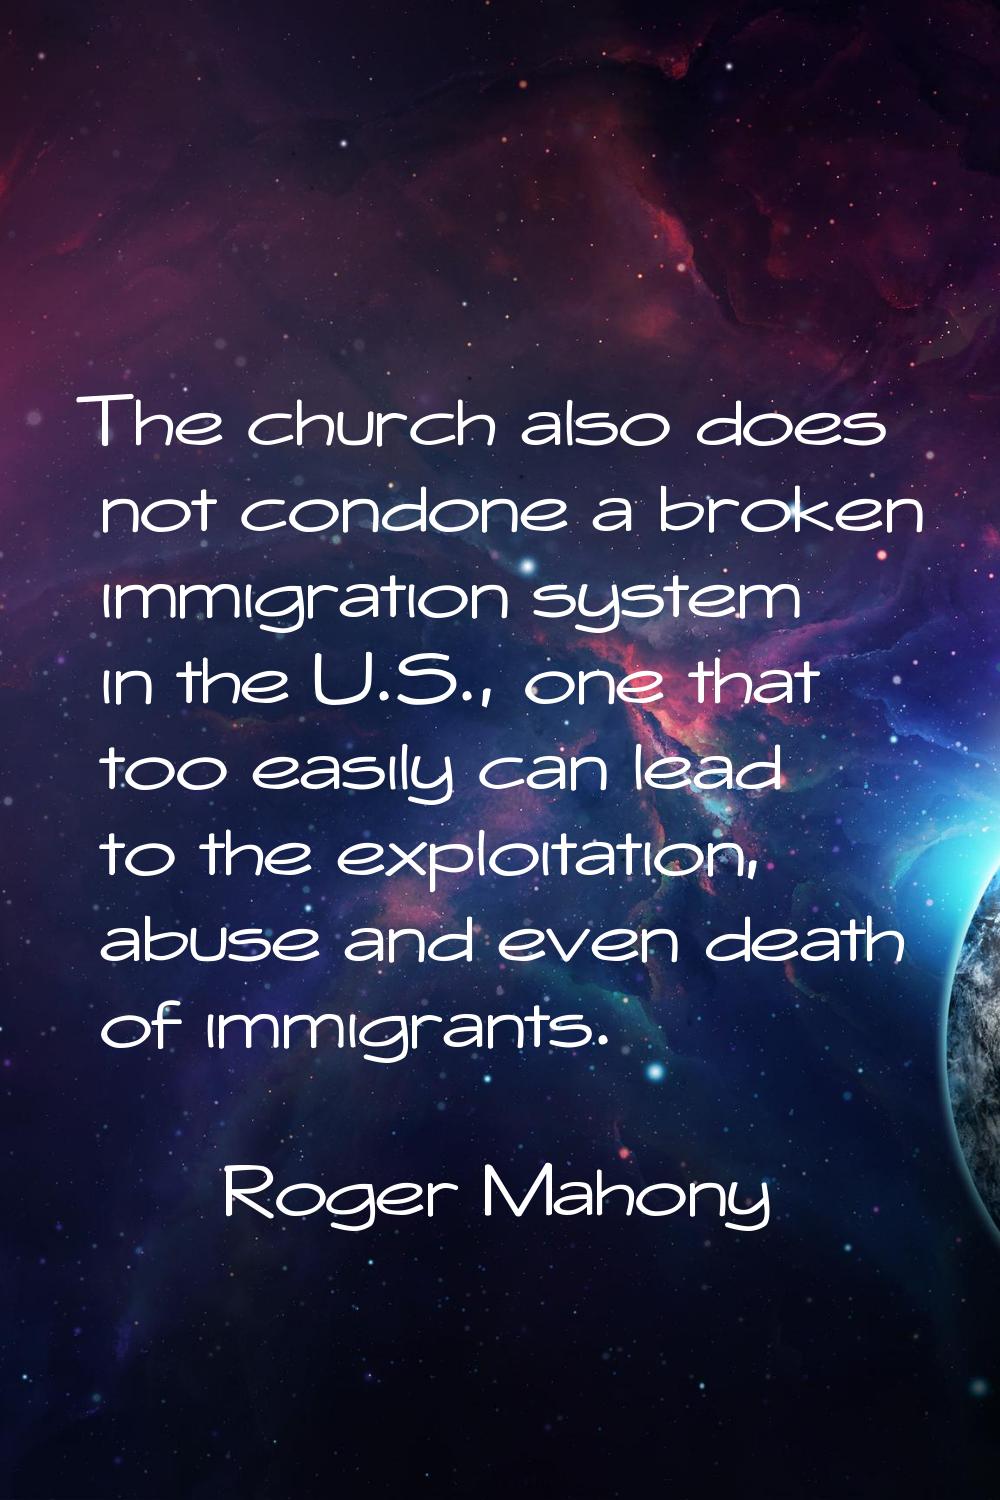 The church also does not condone a broken immigration system in the U.S., one that too easily can l